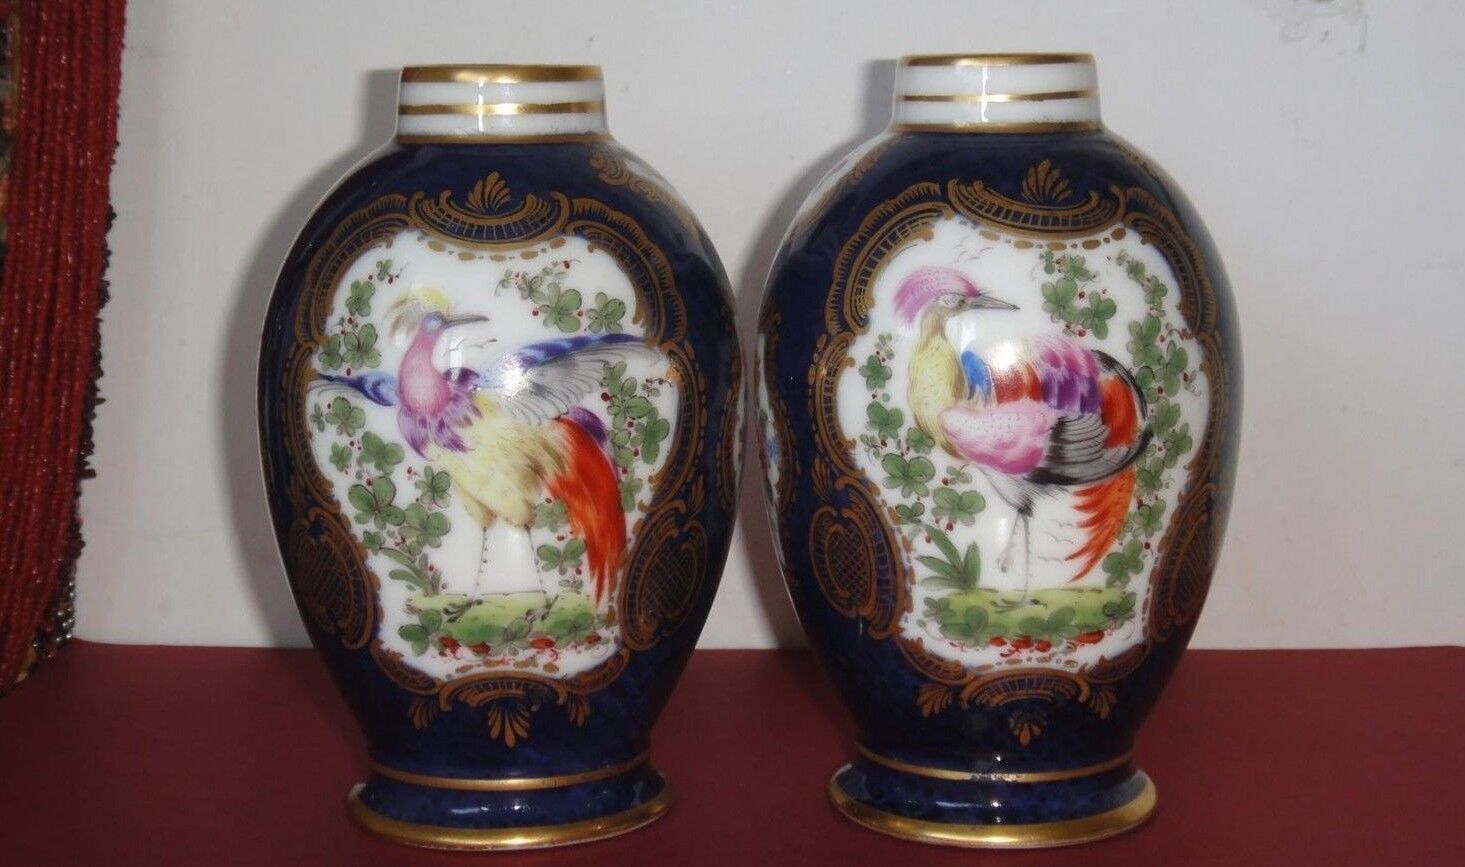  Rare Dr John Wall Period 18th c. Worcester Porcelain Two Cobalt Vases